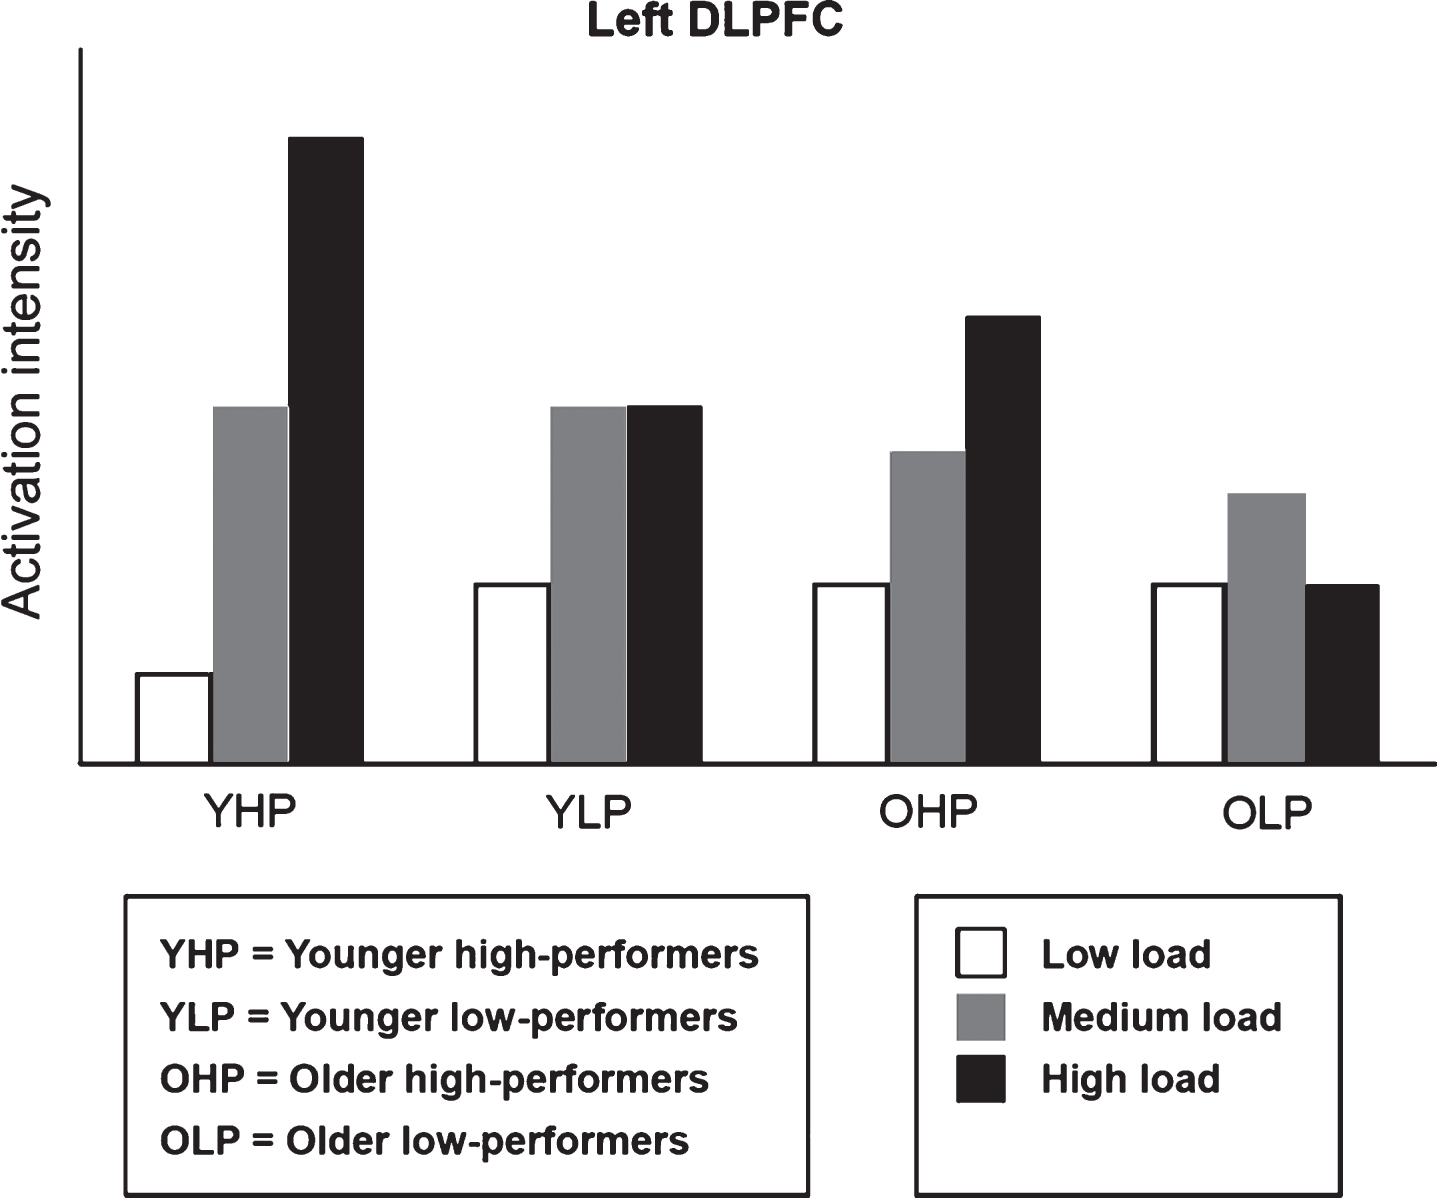 Hypothetical model of left dorsolateral prefrontal cortex (DLPFC) activation modulated by age and performance level (particularly based upon the results of Nagel et al. [69] and Bauer et al. [86]). The bar chart indicates a flexible upregulation of DLPFC activation in YHP as neural response to increasing load. OHP show a similar though less differentiated pattern indicating a flexible recruitment of neural resources similar to that of YHP. By contrast, neural resources appear to be exhausted at medium or low load in YLP, and OLP respectively. Please notice that qualitative group differences are shown; exact quantitative relations were not considered.